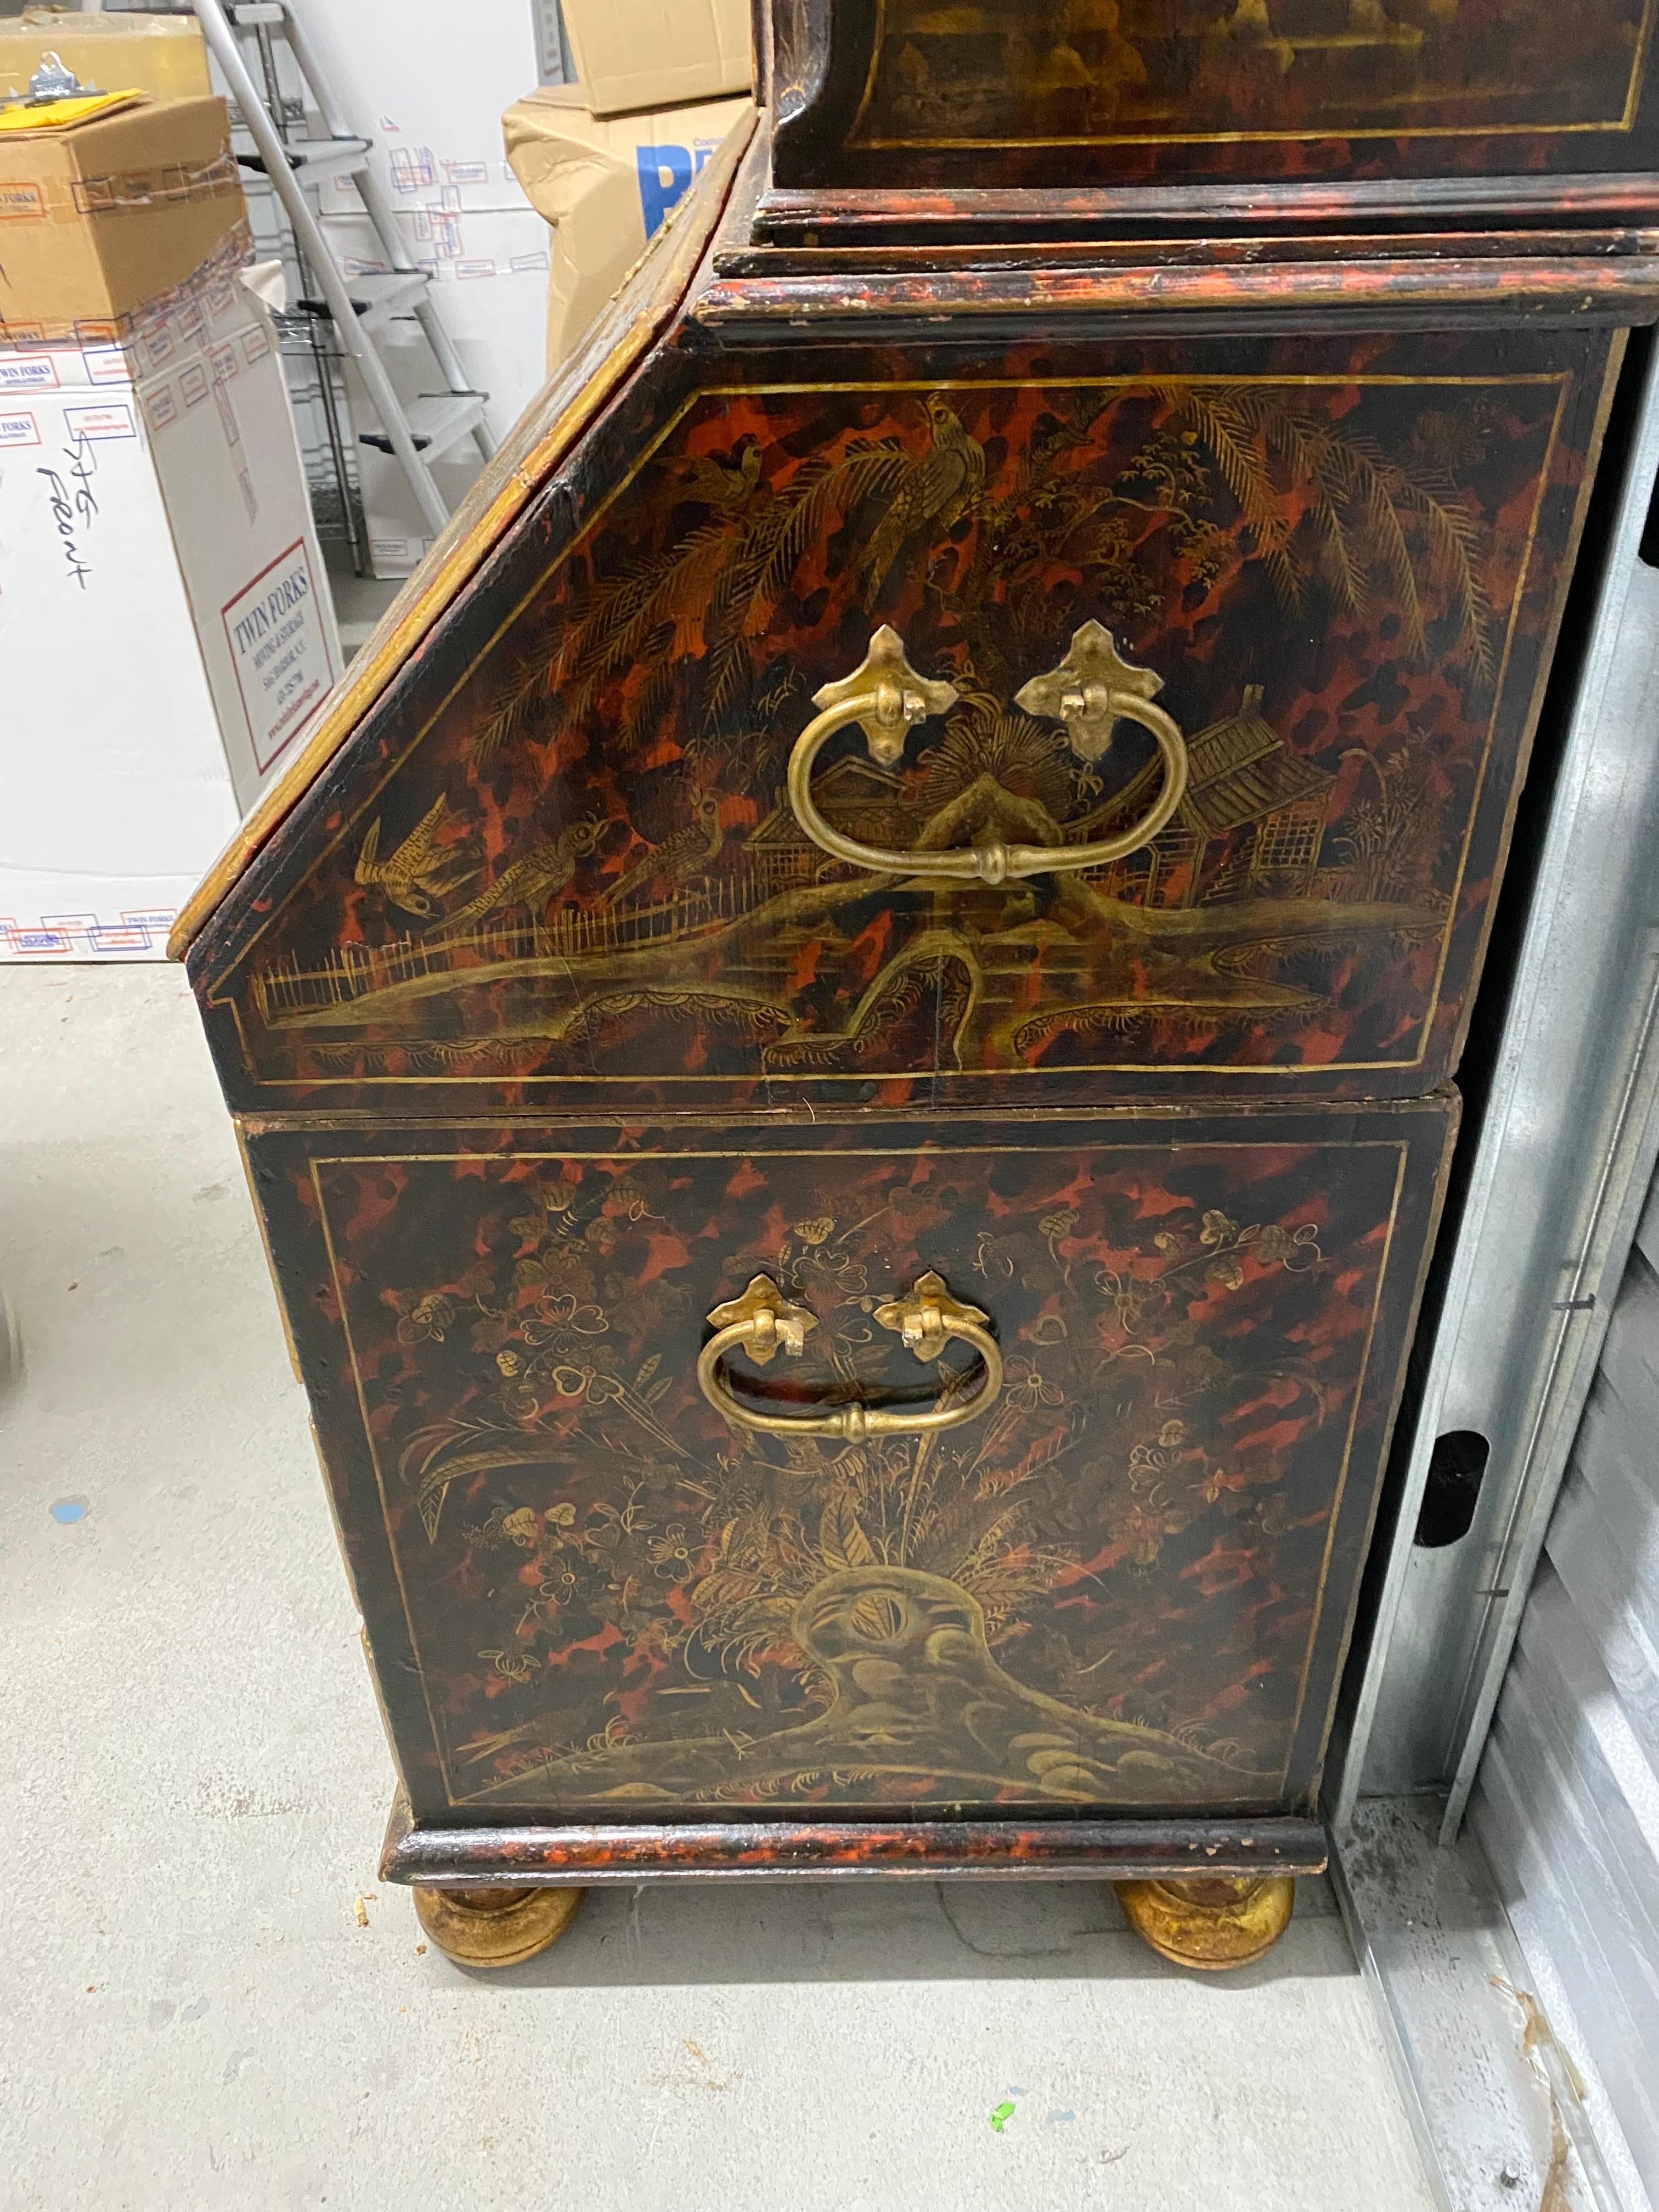 18th Century Northern European Tortoiseshell Lacquer Japanned Bureau Cabinet Secretary

A rare and fine bureau cabinet. Three sections: a broken pediment crown atop a tall cabinet with 2 shelves (included but not shown in photo) and two drawers.